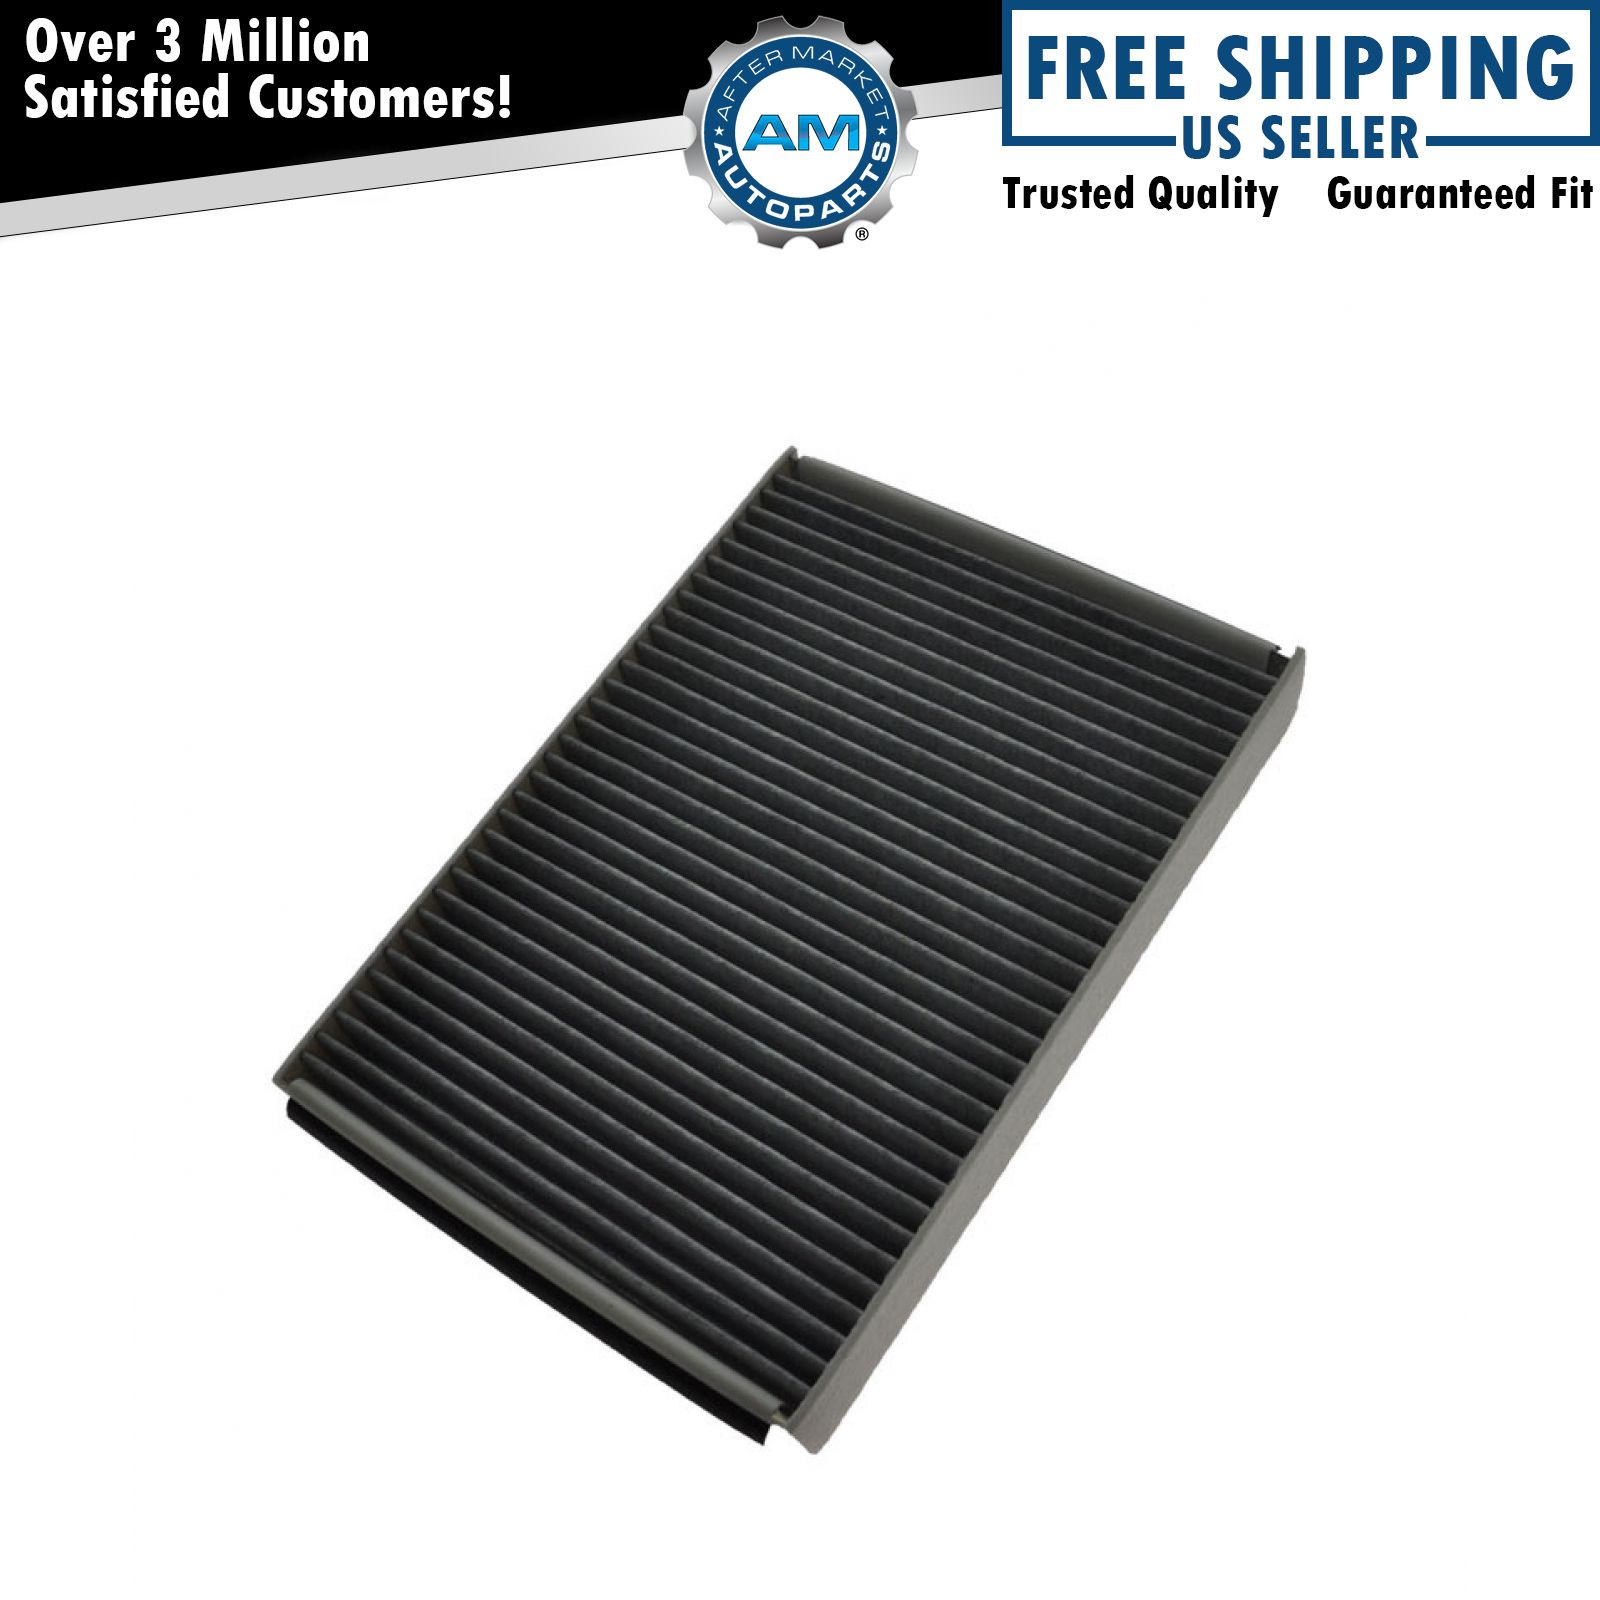 Charcoal Element Interior Blower Cabin Air Filter for LR2 S80 V70 XC60 XC90